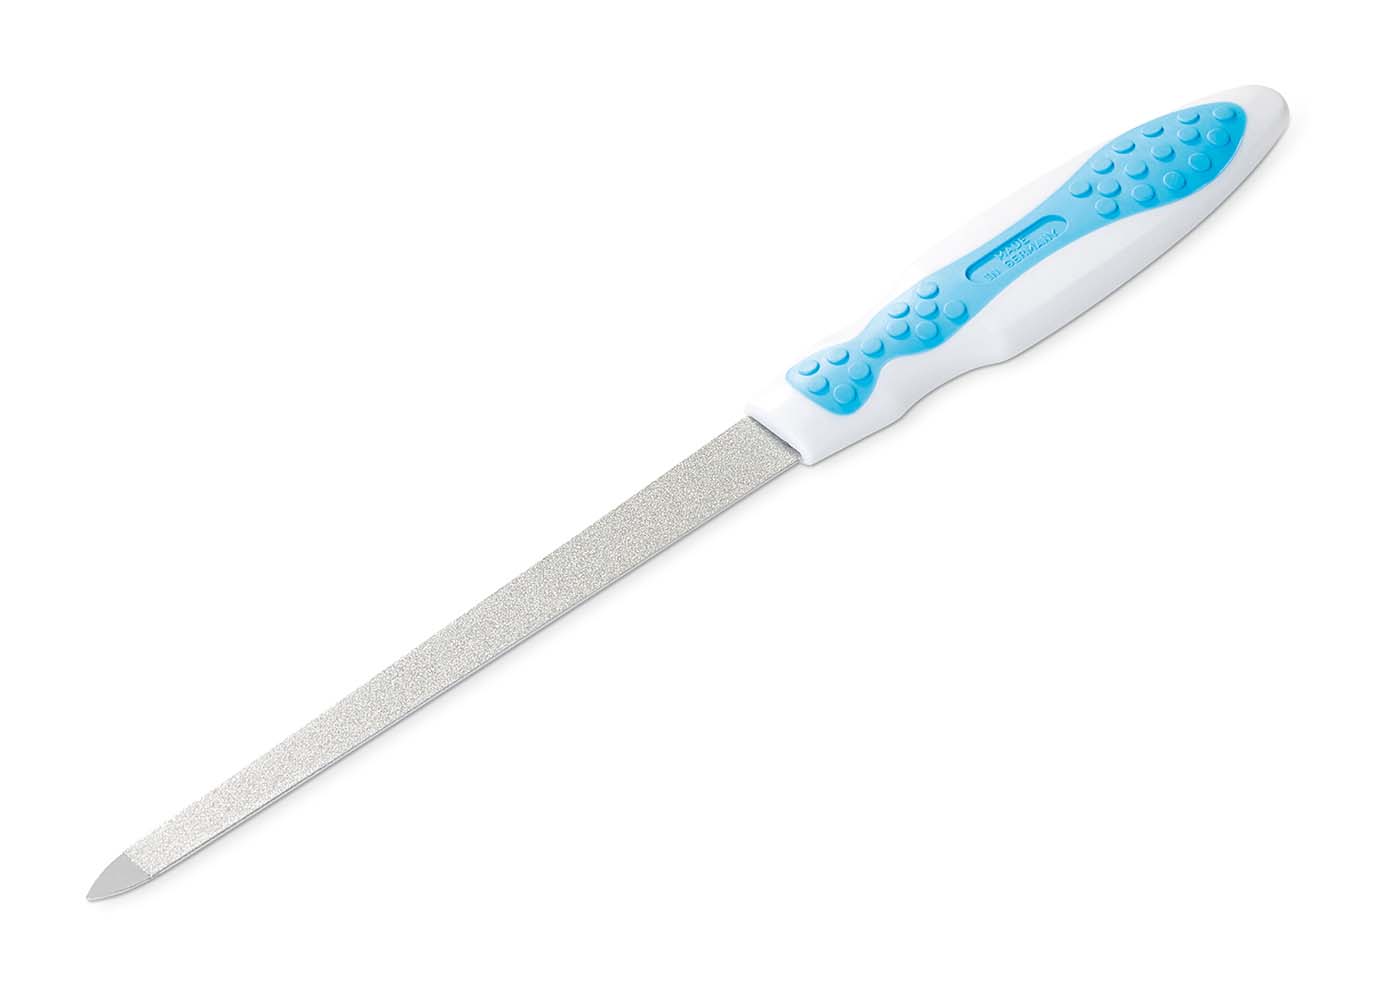 9210580 A nail file of 20 cm. The nail file has a non-slip grip, which provides better grip. The file has a rough and a fine side for the care of the nails.